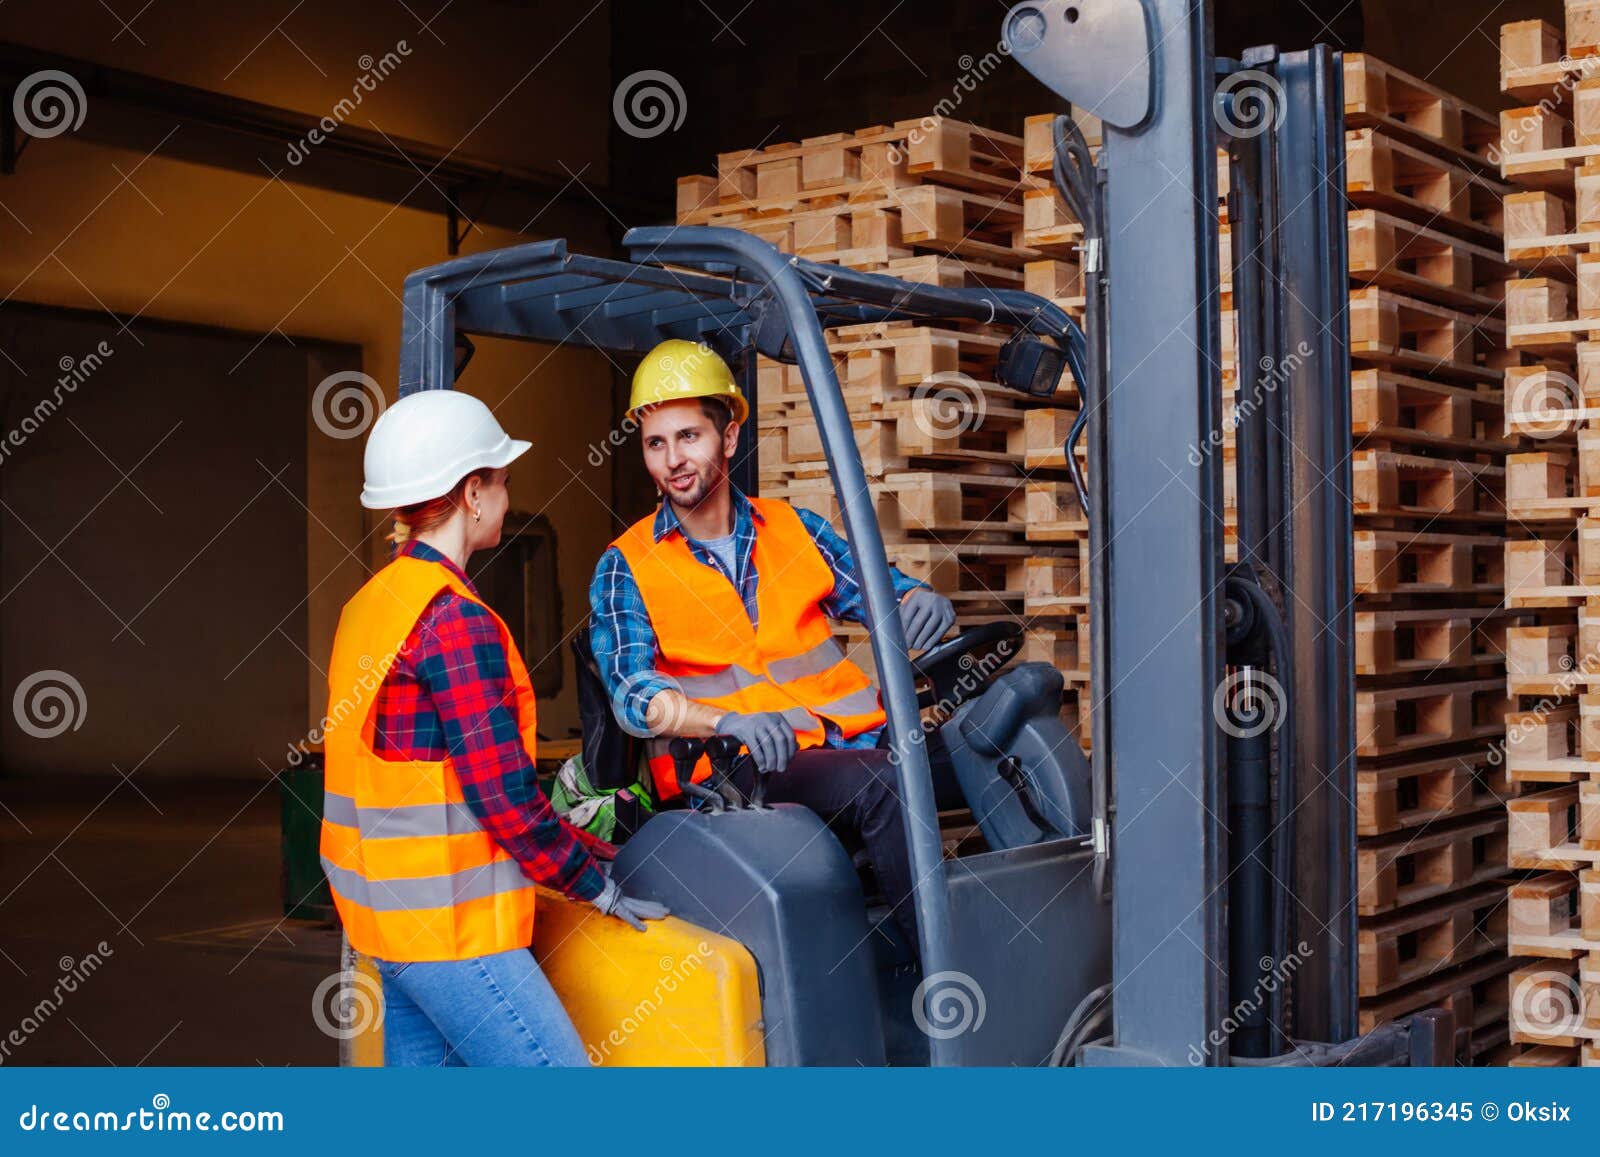 man worker sitting in industrial forklift at warehouse talking to woman co-worker